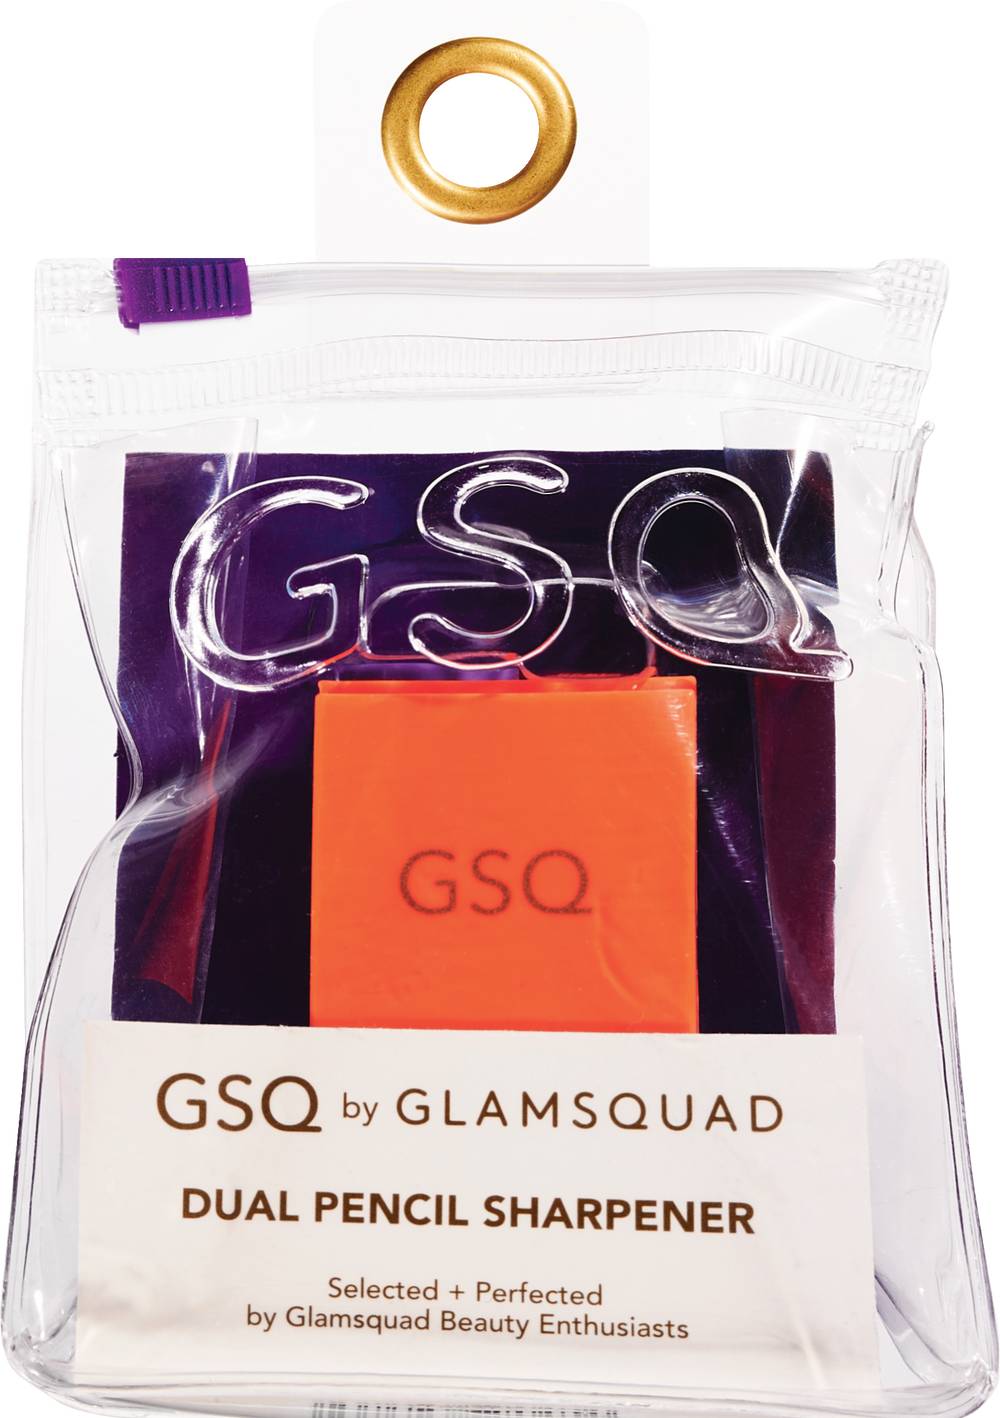 GSQ by GLAMSQUAD Dual Pencil Sharpener